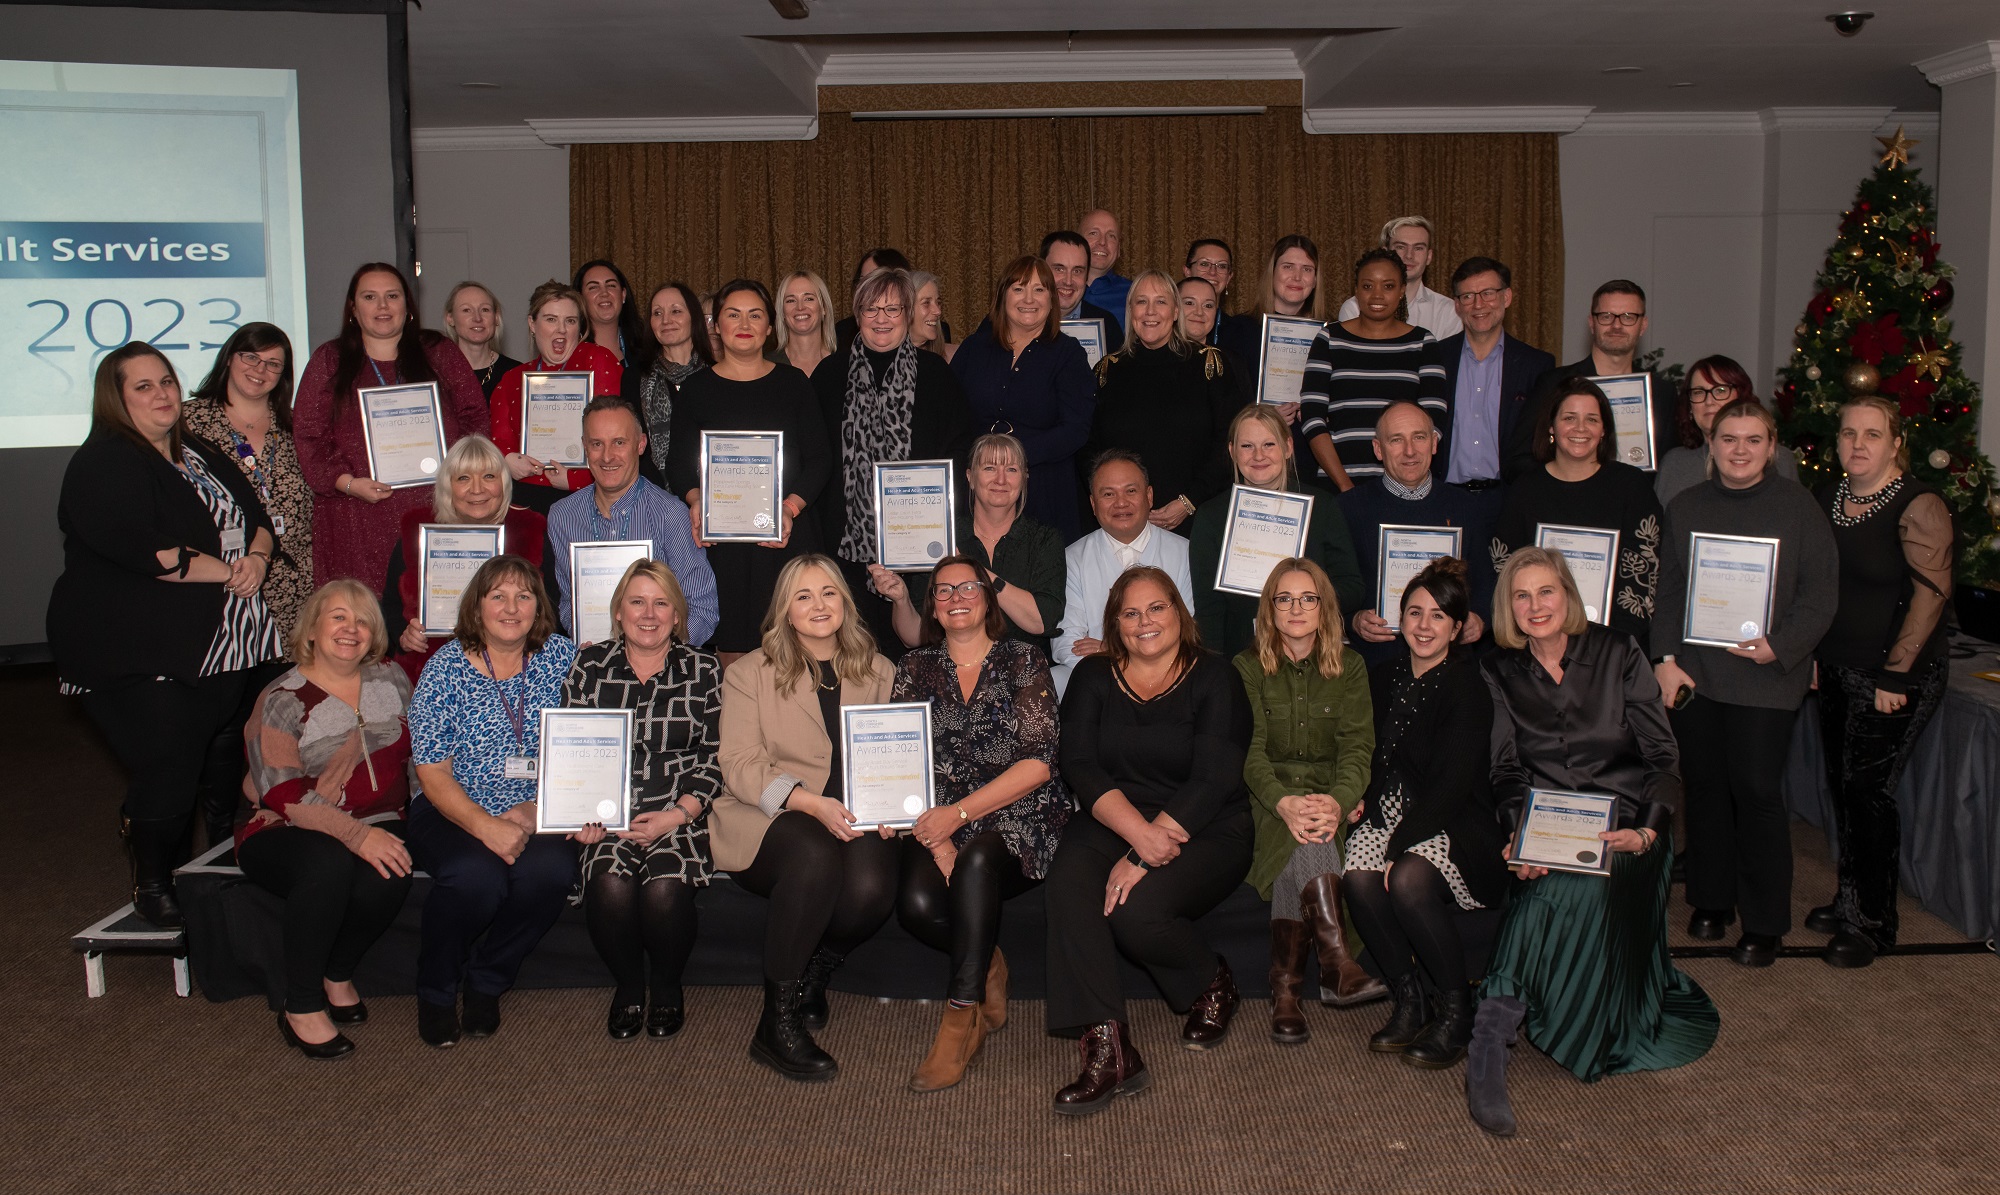 Group shot Awards given for the dedication of public health and social care teams